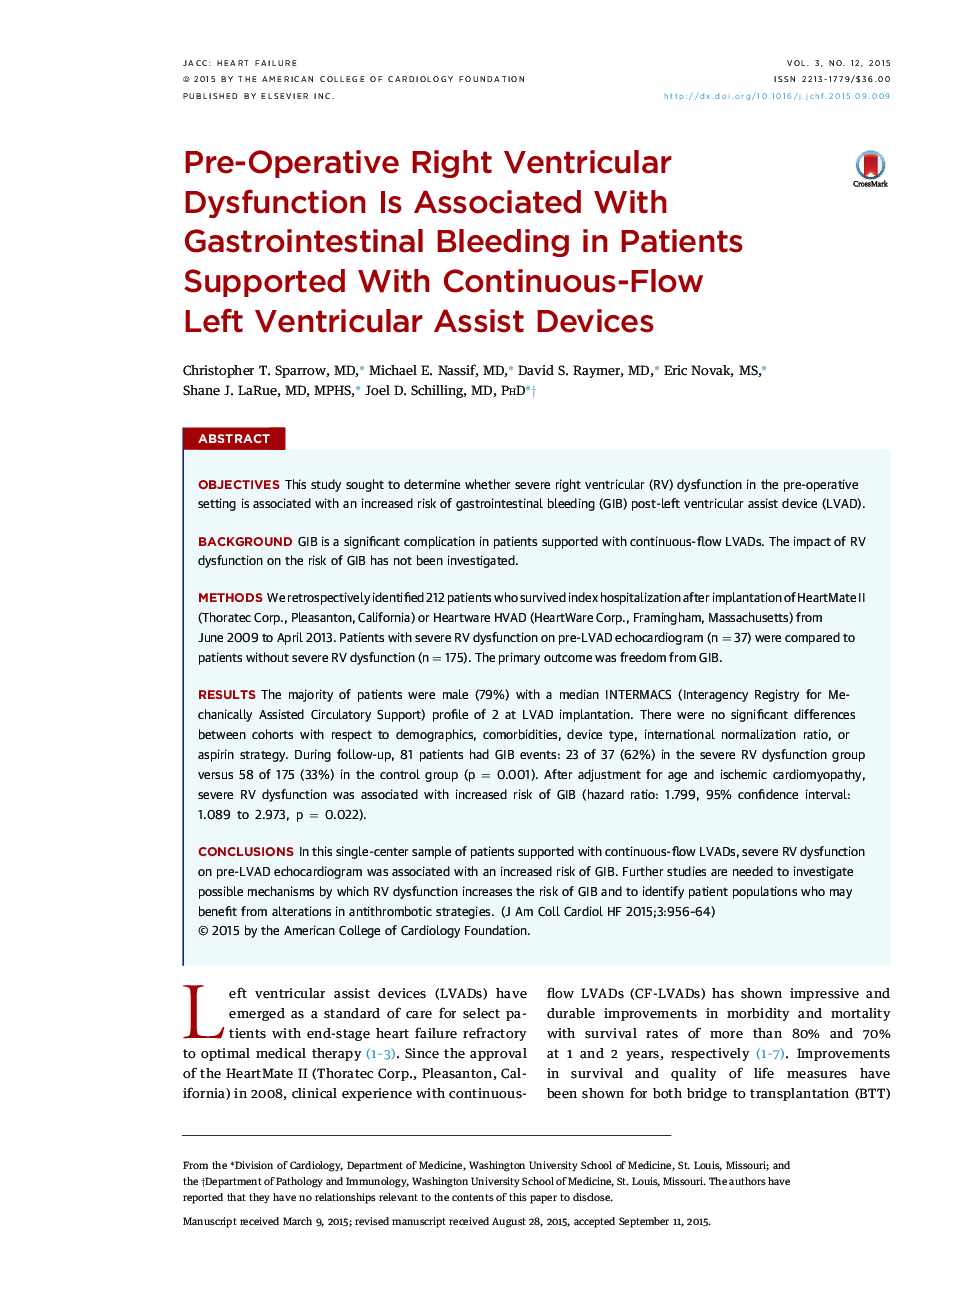 Pre-Operative Right Ventricular Dysfunction Is Associated With Gastrointestinal Bleeding in Patients Supported With Continuous-Flow Left Ventricular Assist Devices 